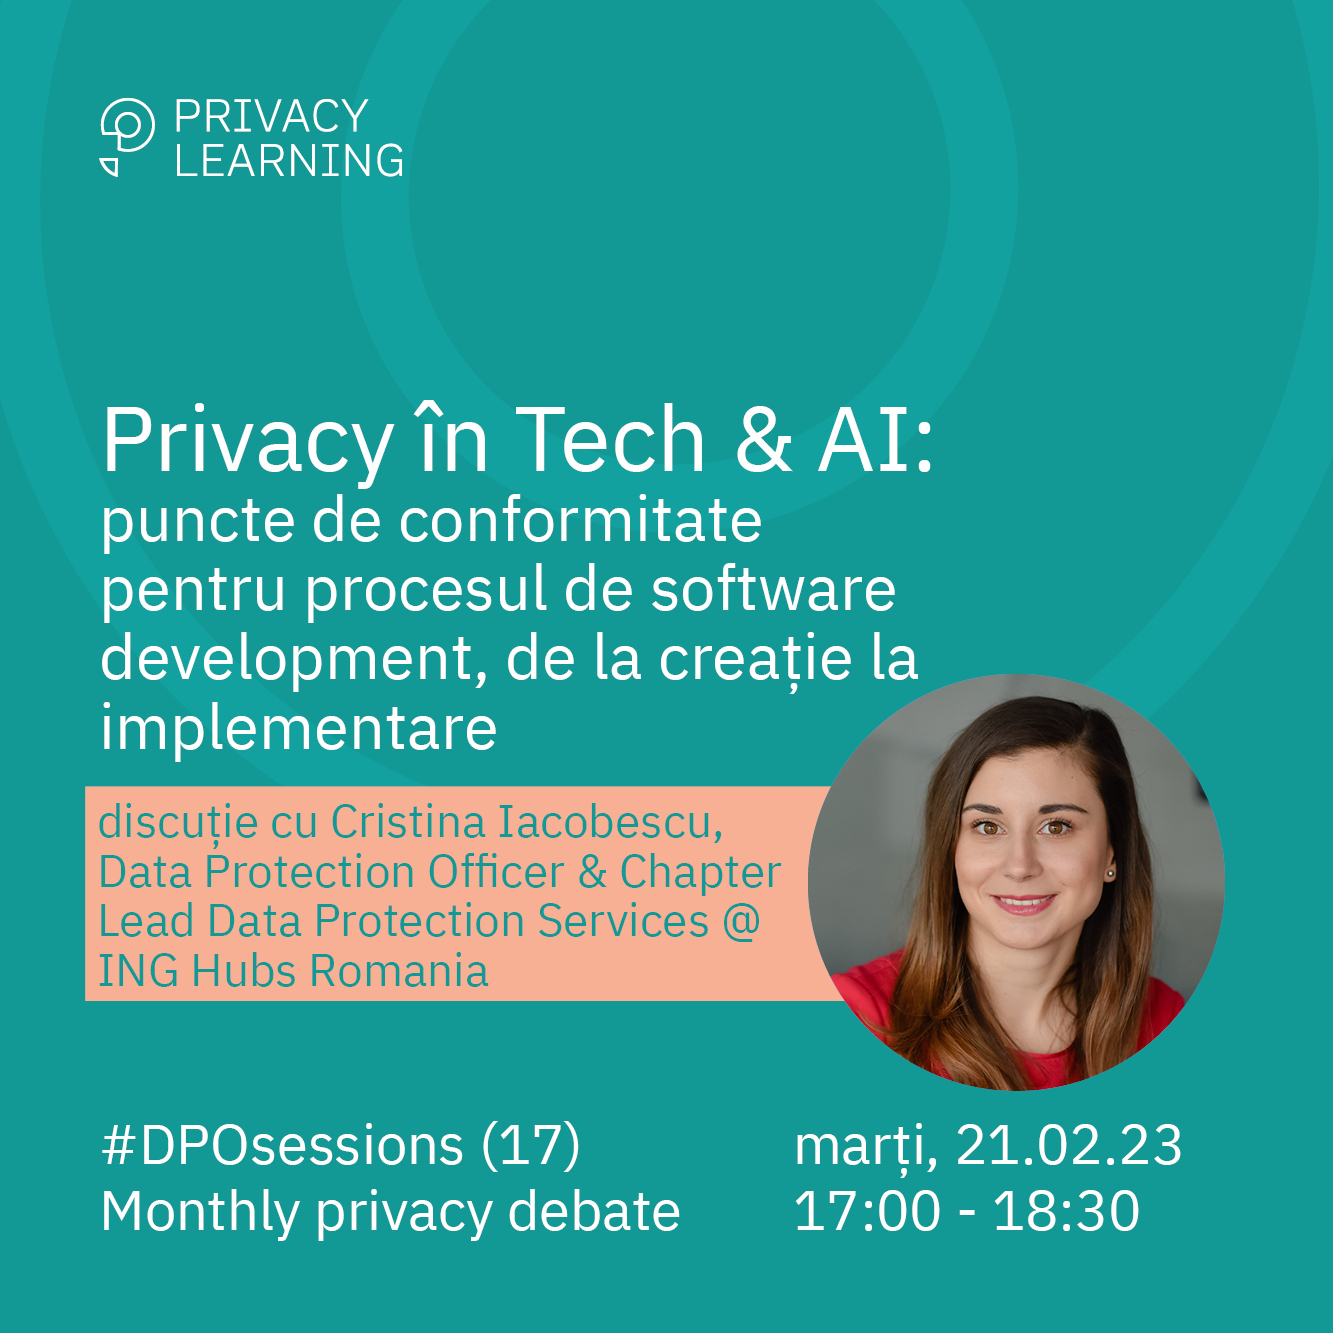 DPOsessions 17 - privacy in tech si AI (1)